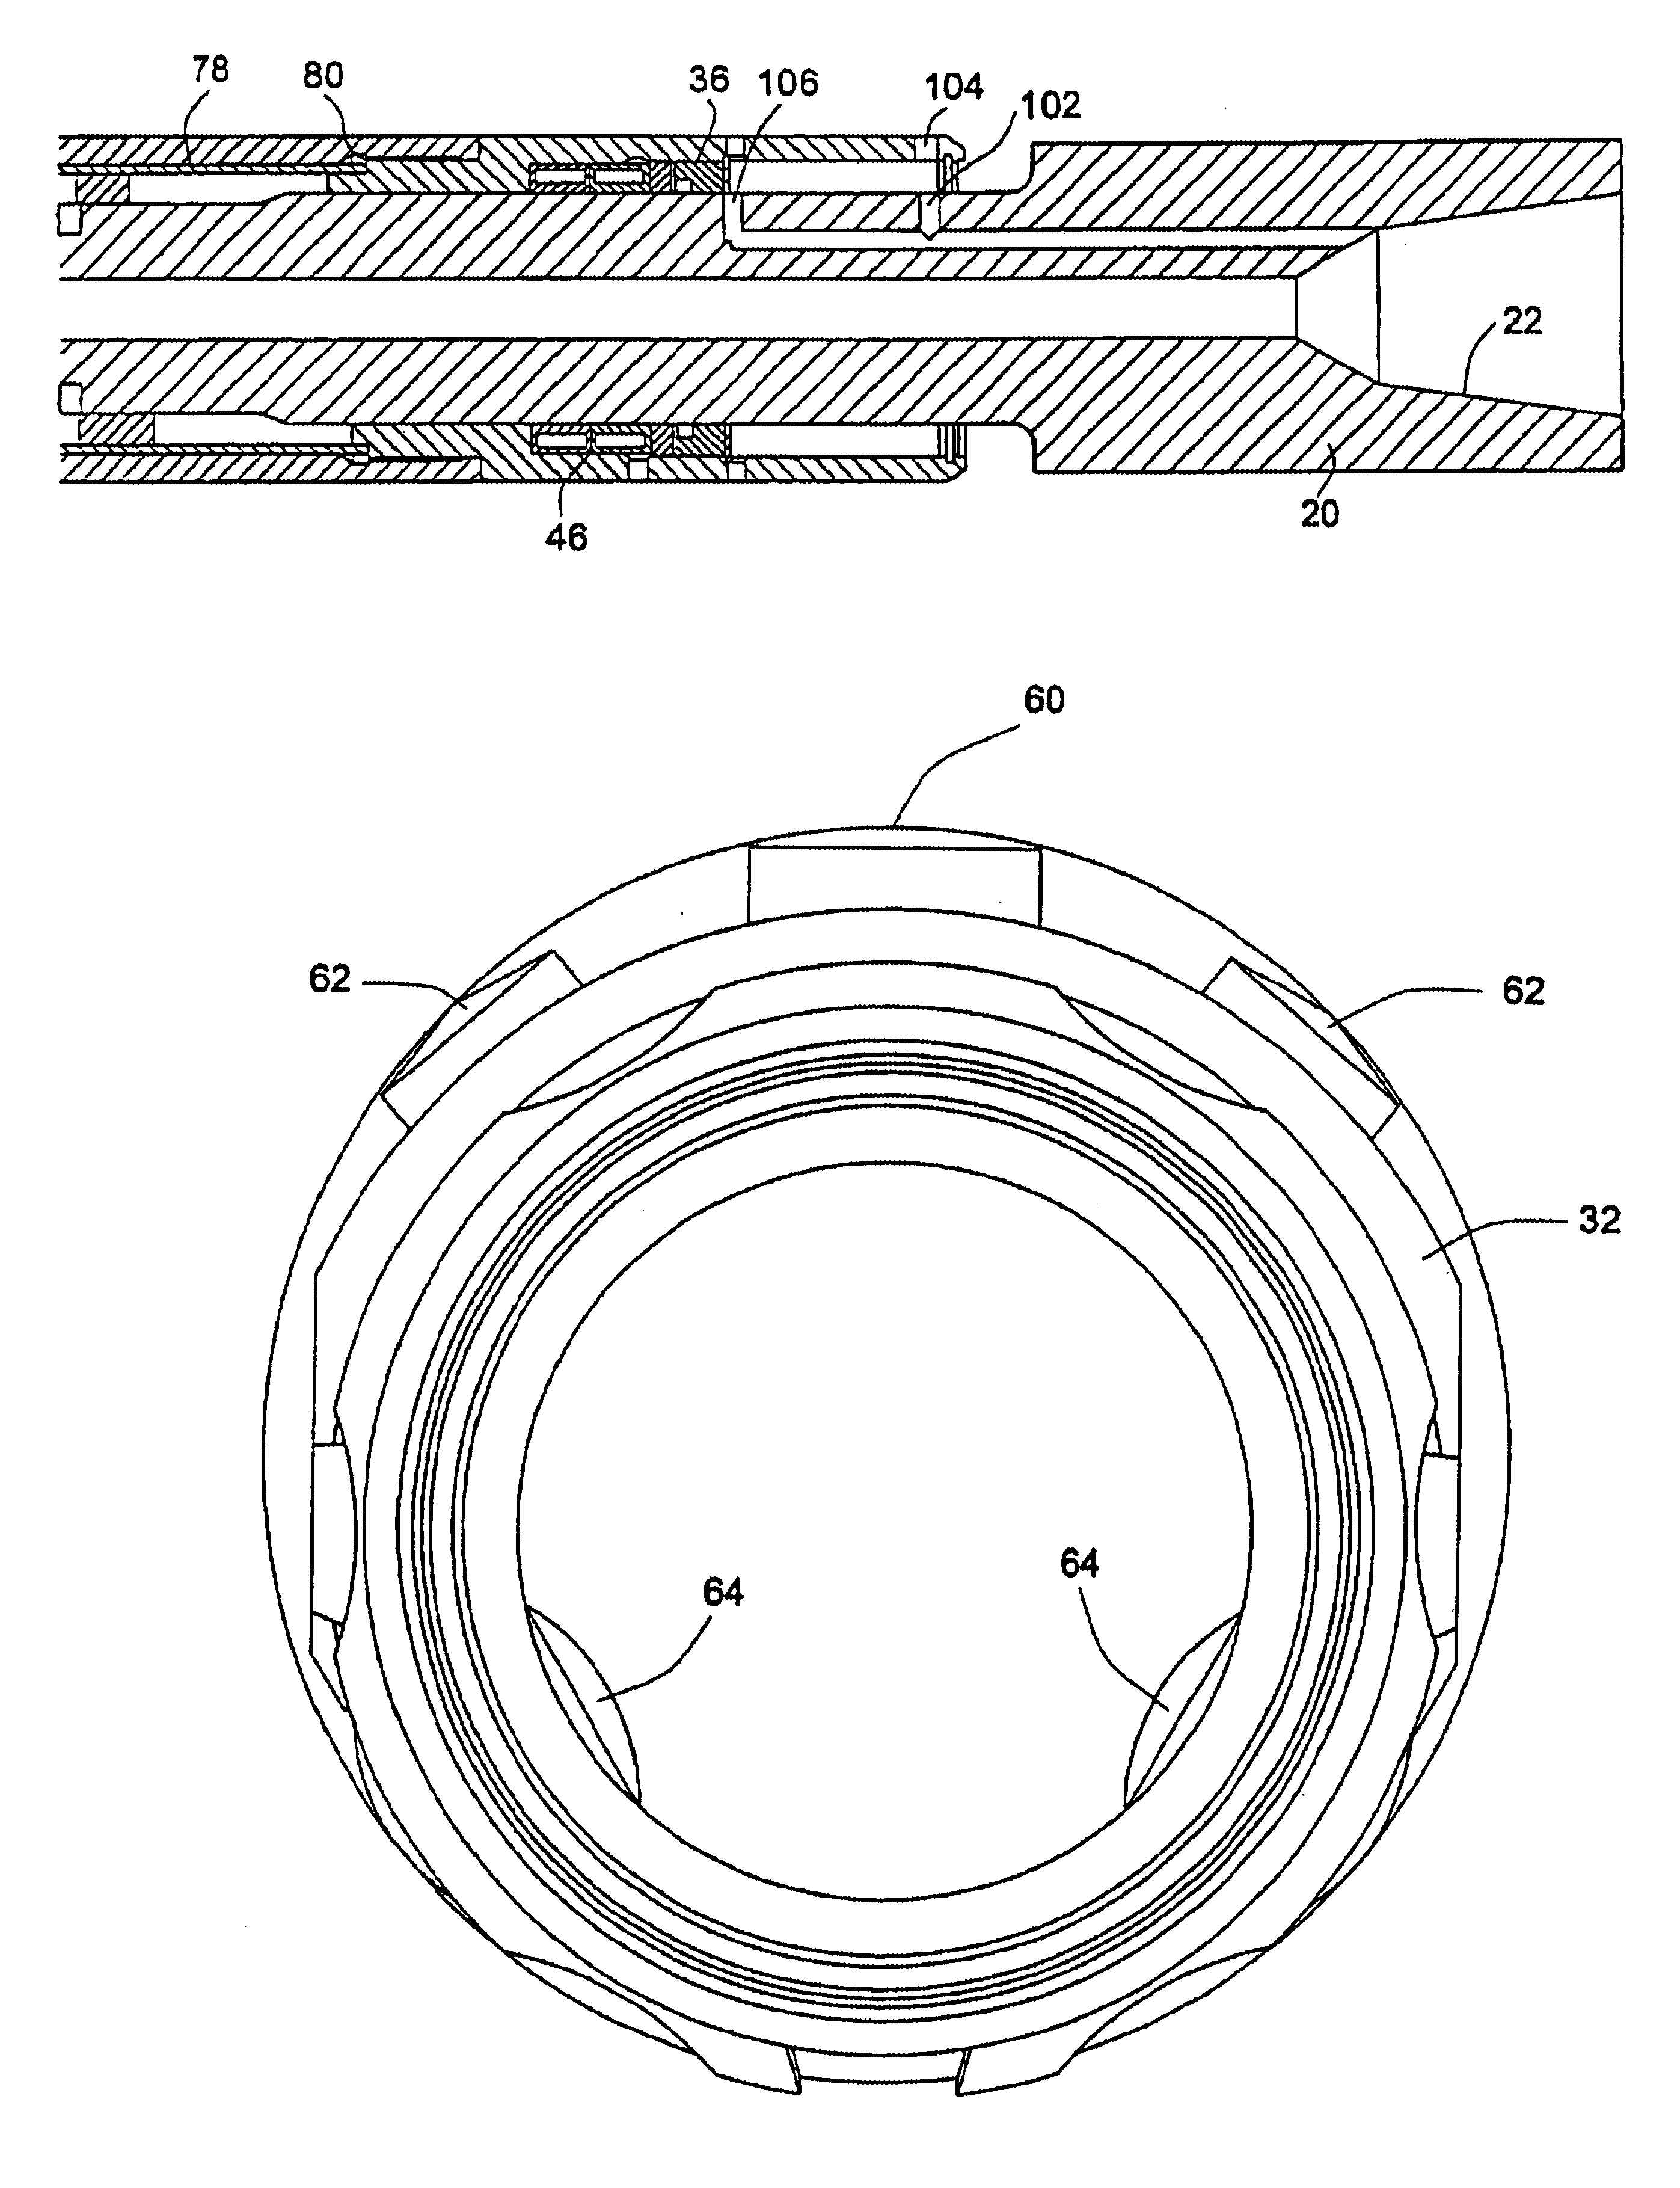 Rotary steerable drilling tool and associated method of use